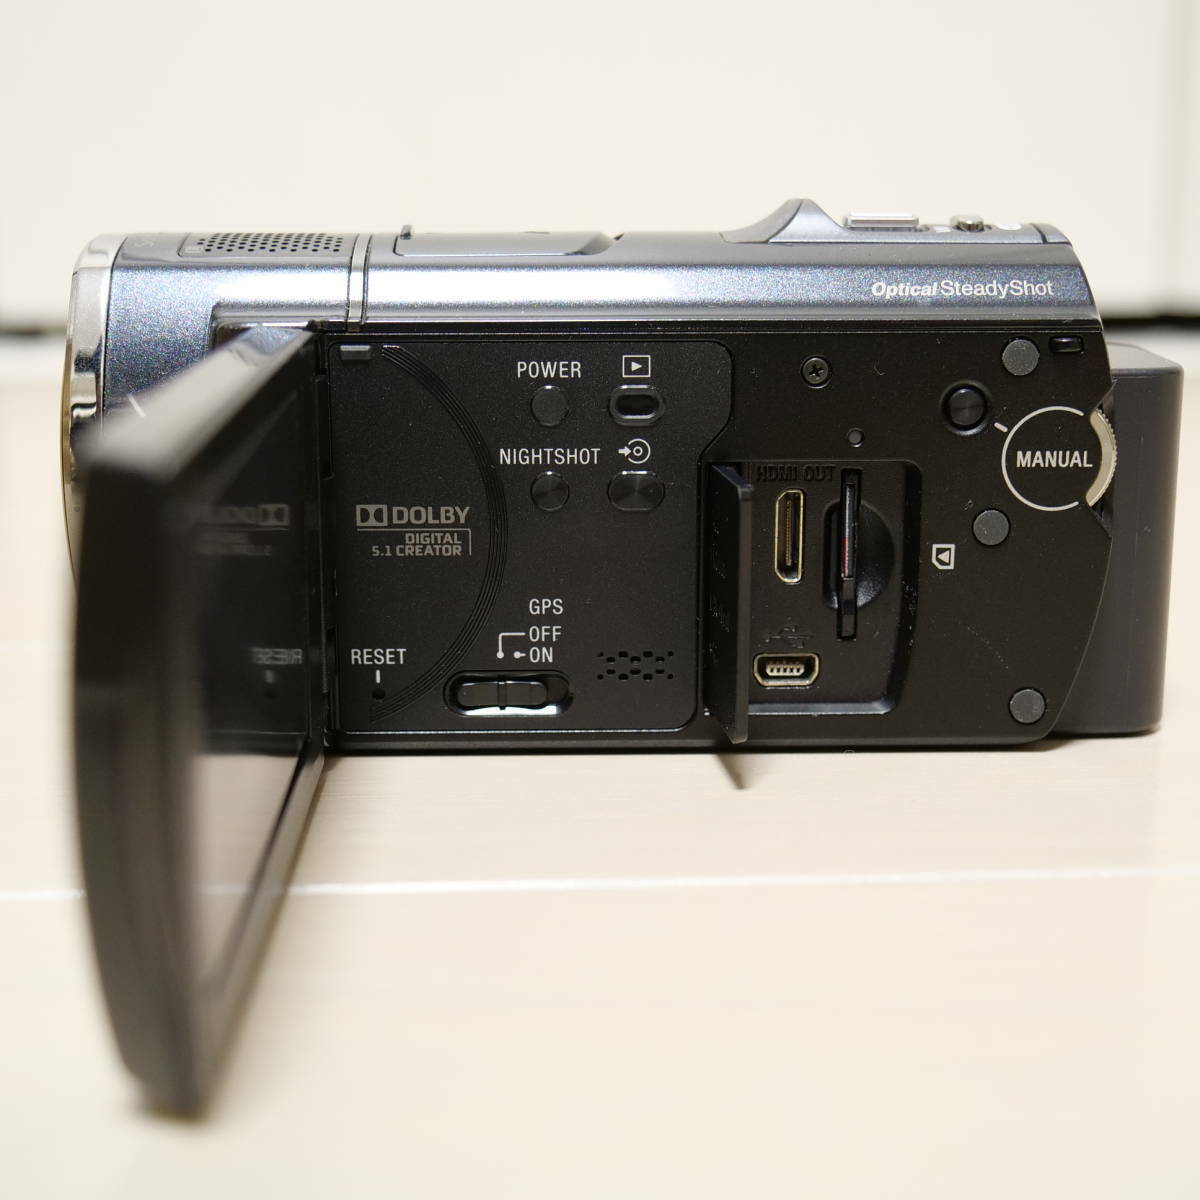 Sony HDR-CX520 (64 GB) Camcorder for sale online | eBay